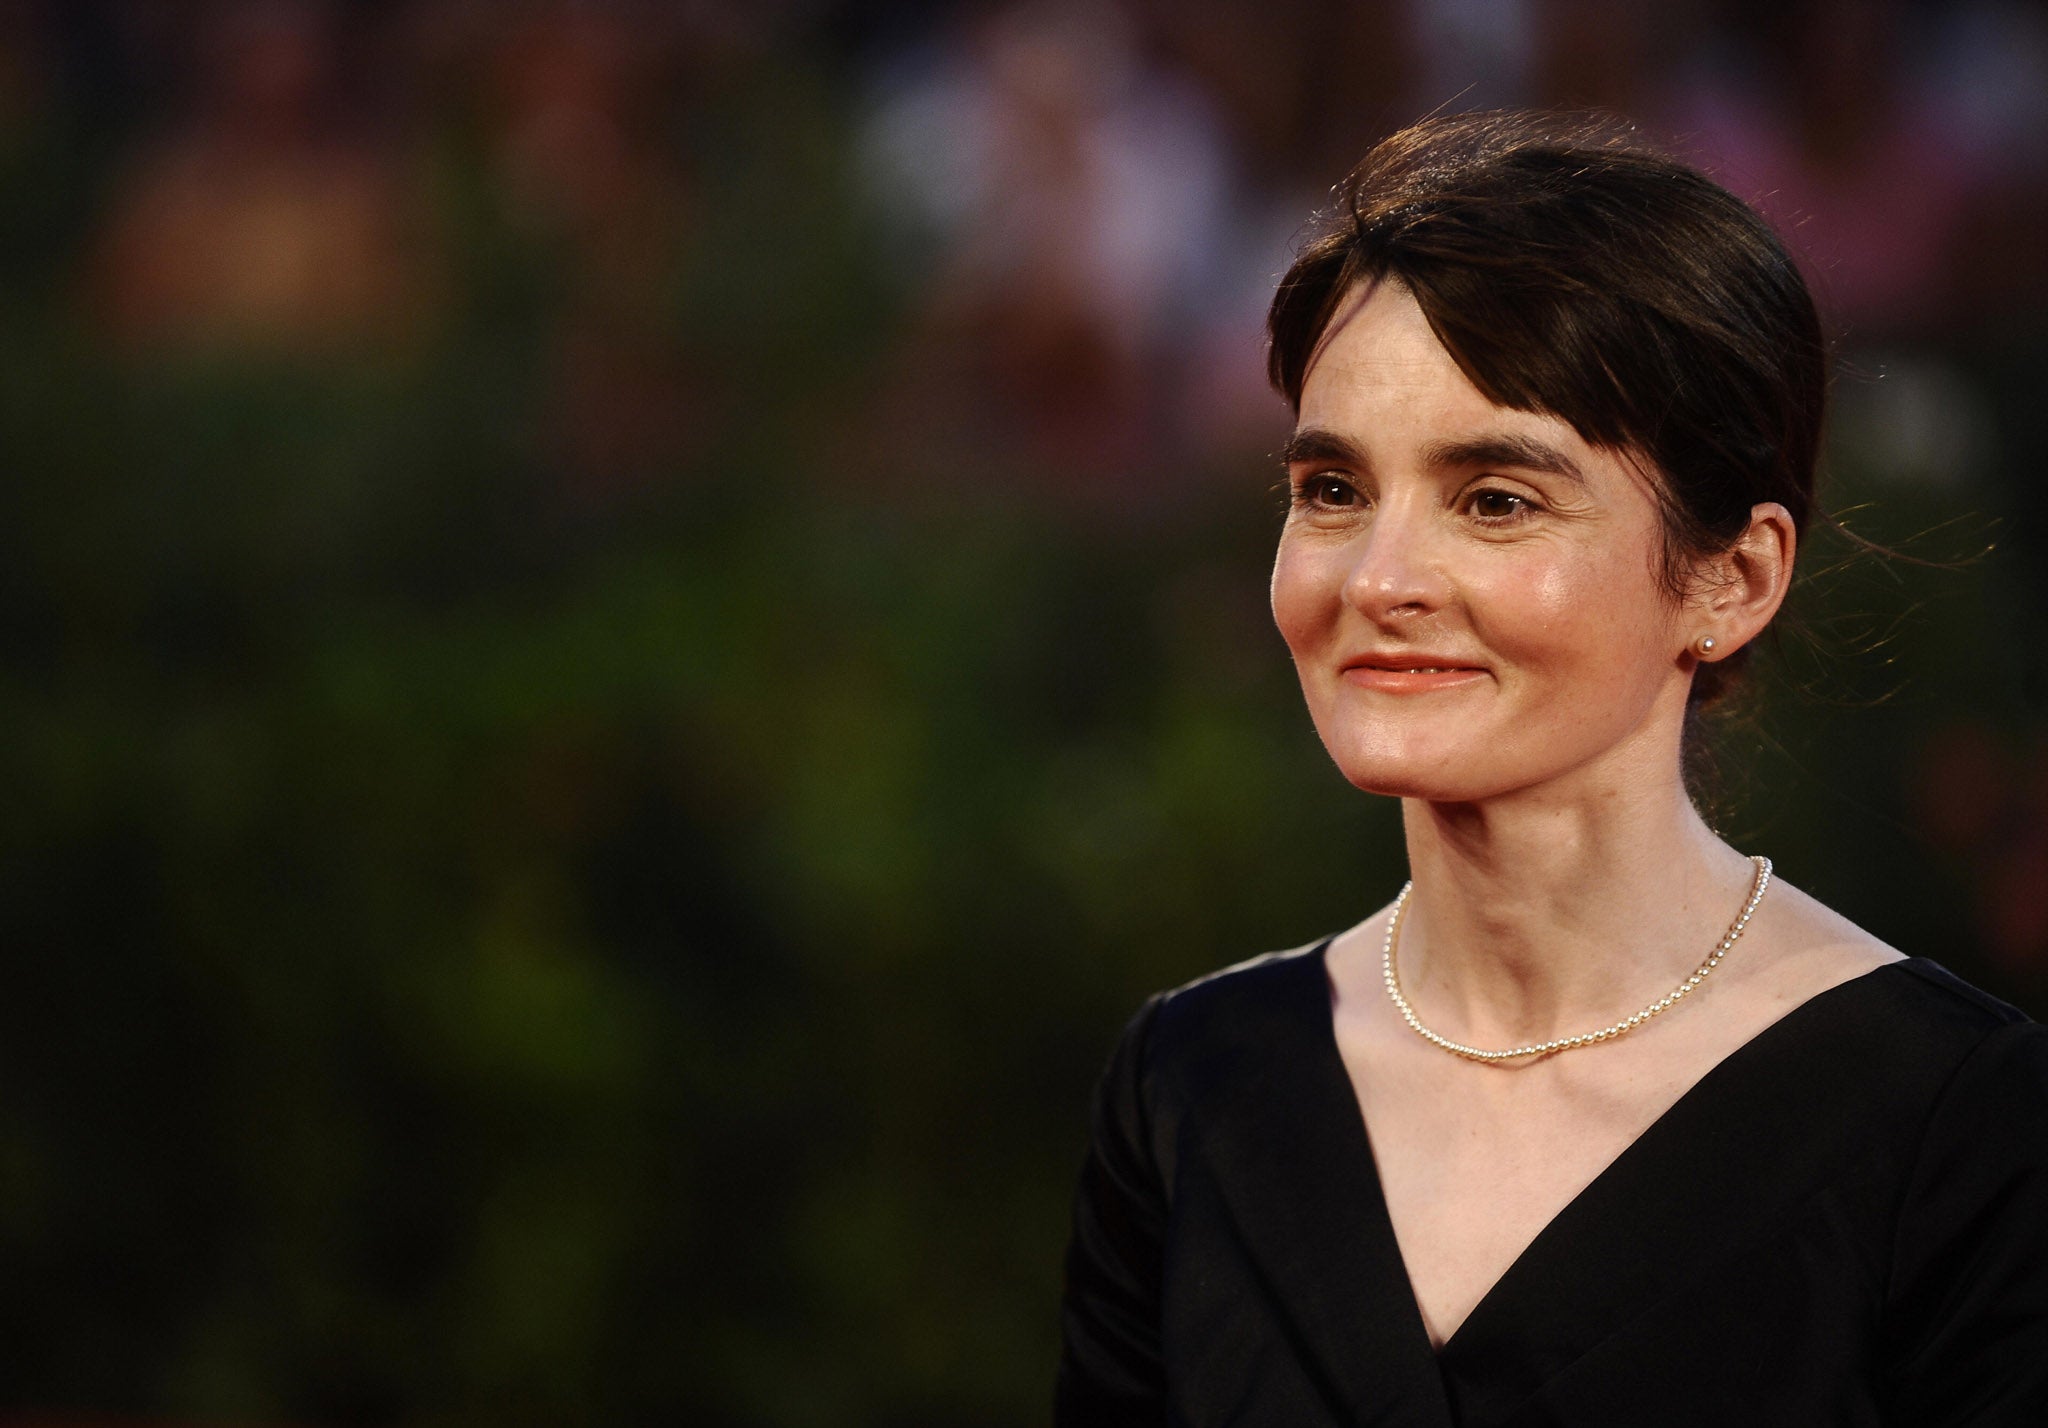 Bridget Jones 3 Shirley Henderson Too Old To Star In Next Film The Independent The Independent